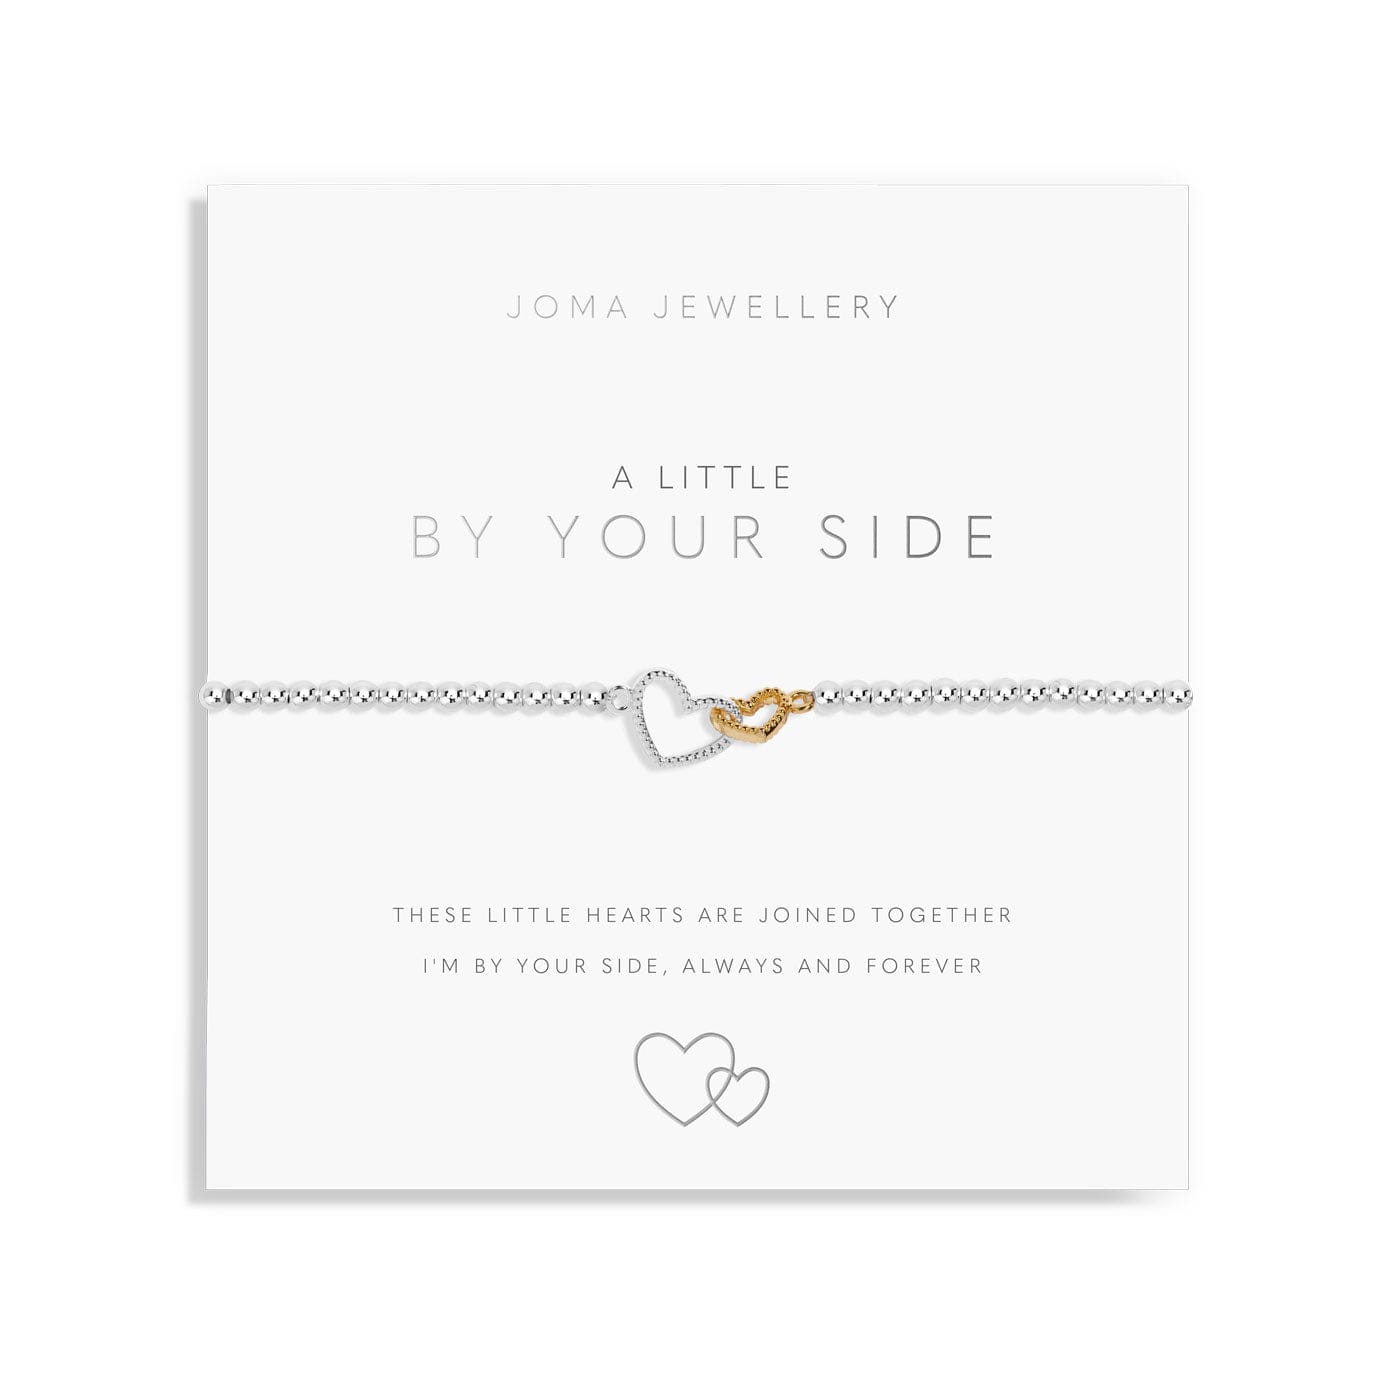 Joma Jewellery Bracelets Joma Jewellery Bracelet - A little By Your Side